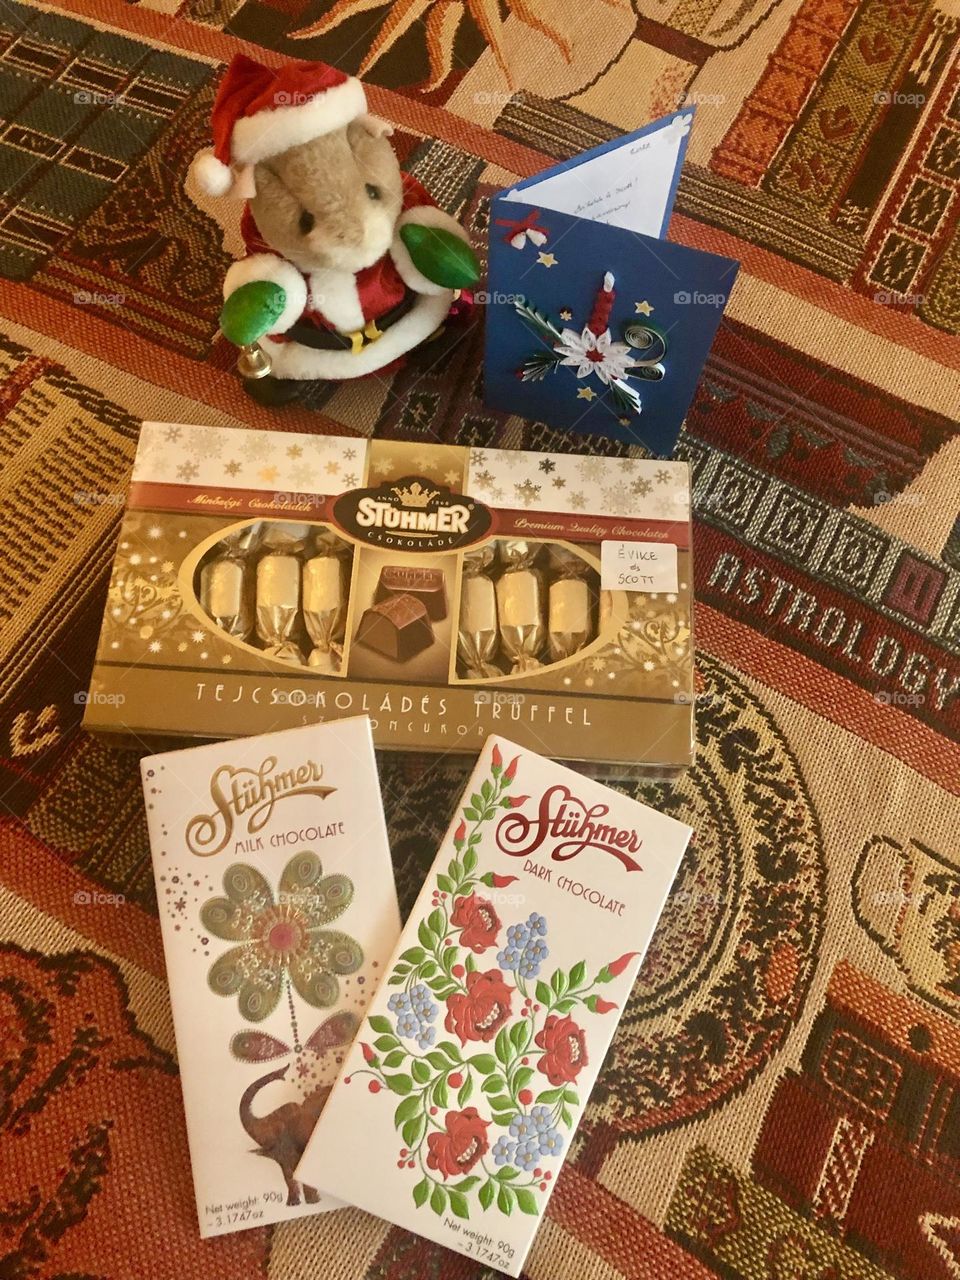 Christmas gifts and chocolates / Hungarian gifts 